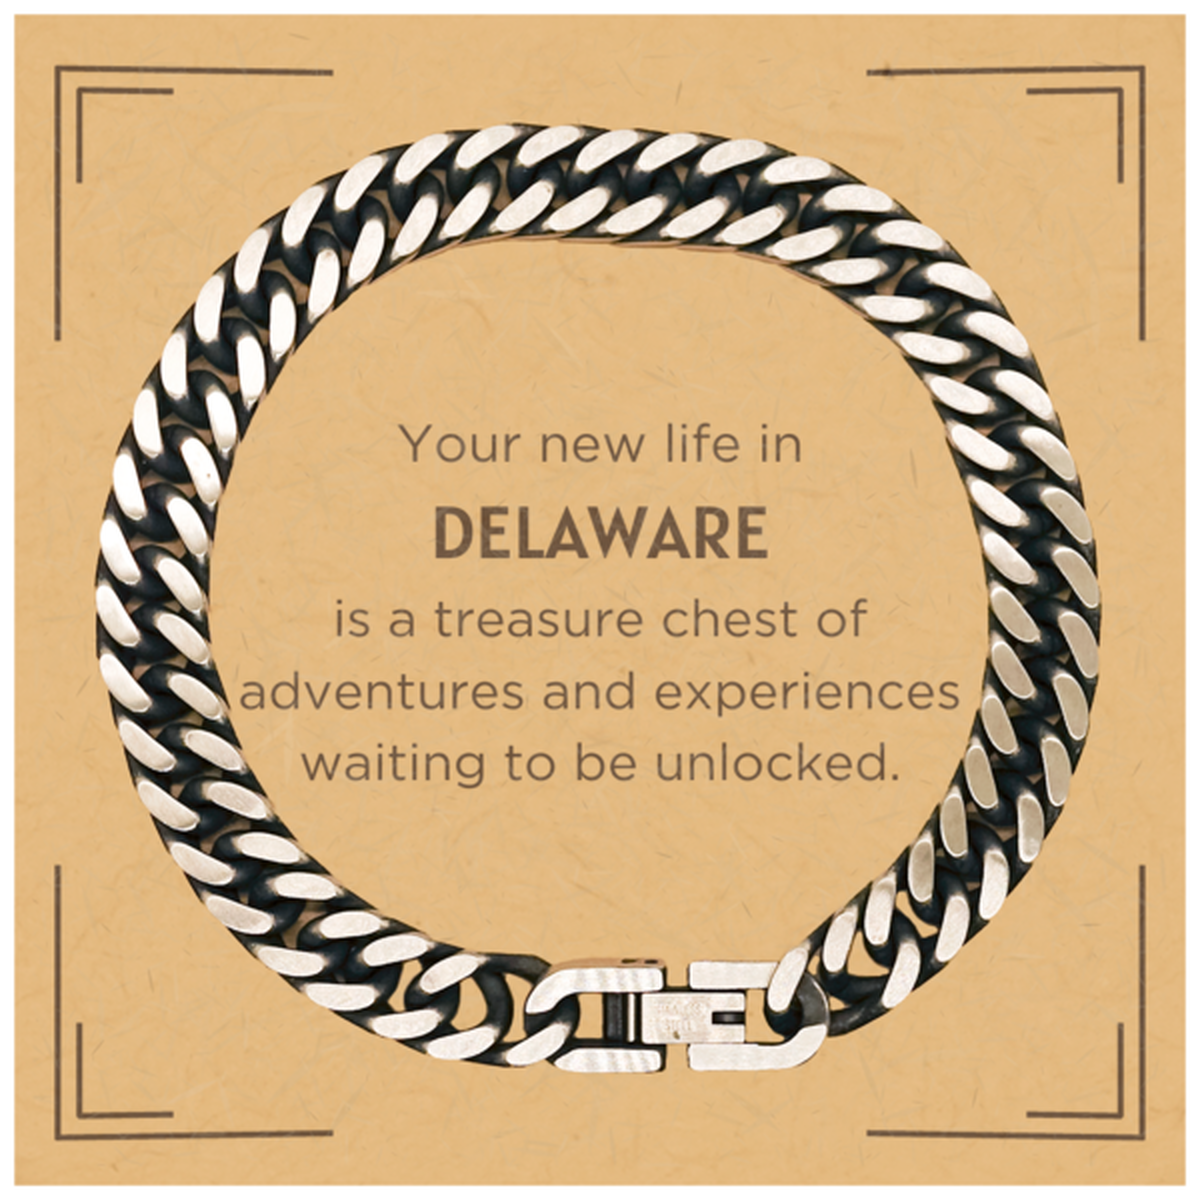 Moving to Delaware Gifts, Your new life in Delaware, Long Distance Delaware Christmas Cuban Link Chain Bracelet For Men, Women, Friends, Coworkers